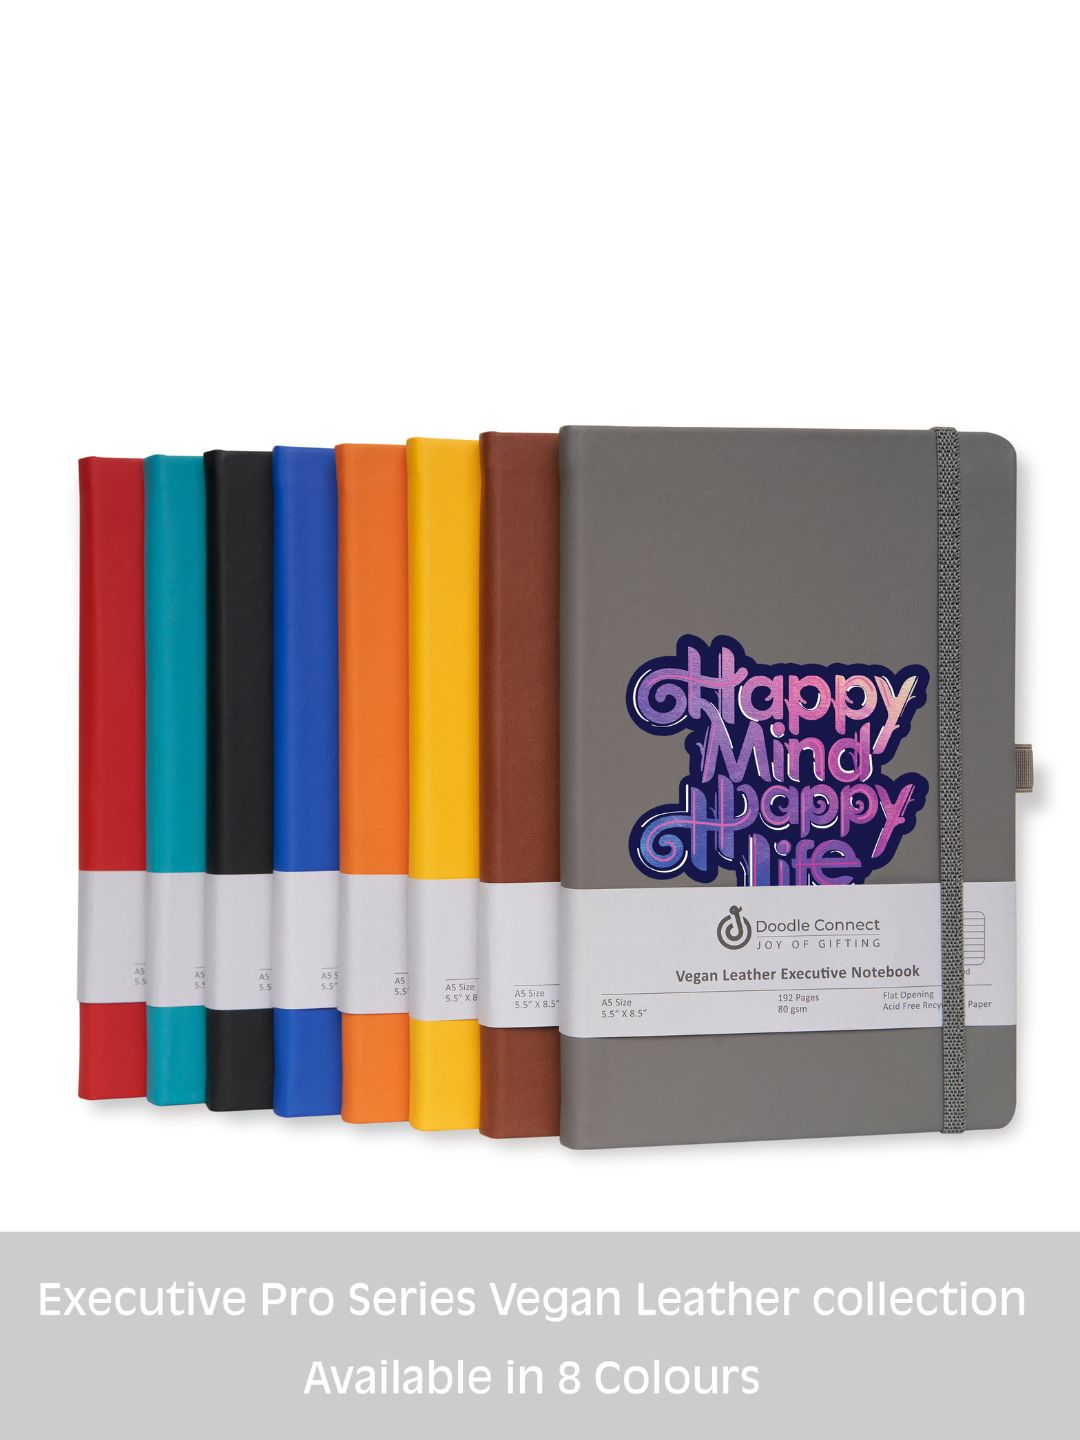 Pro Series Executive A5 PU Leather Hardbound Ruled Grey Notebook with Pen Loop [Happy Mind Happy Life]